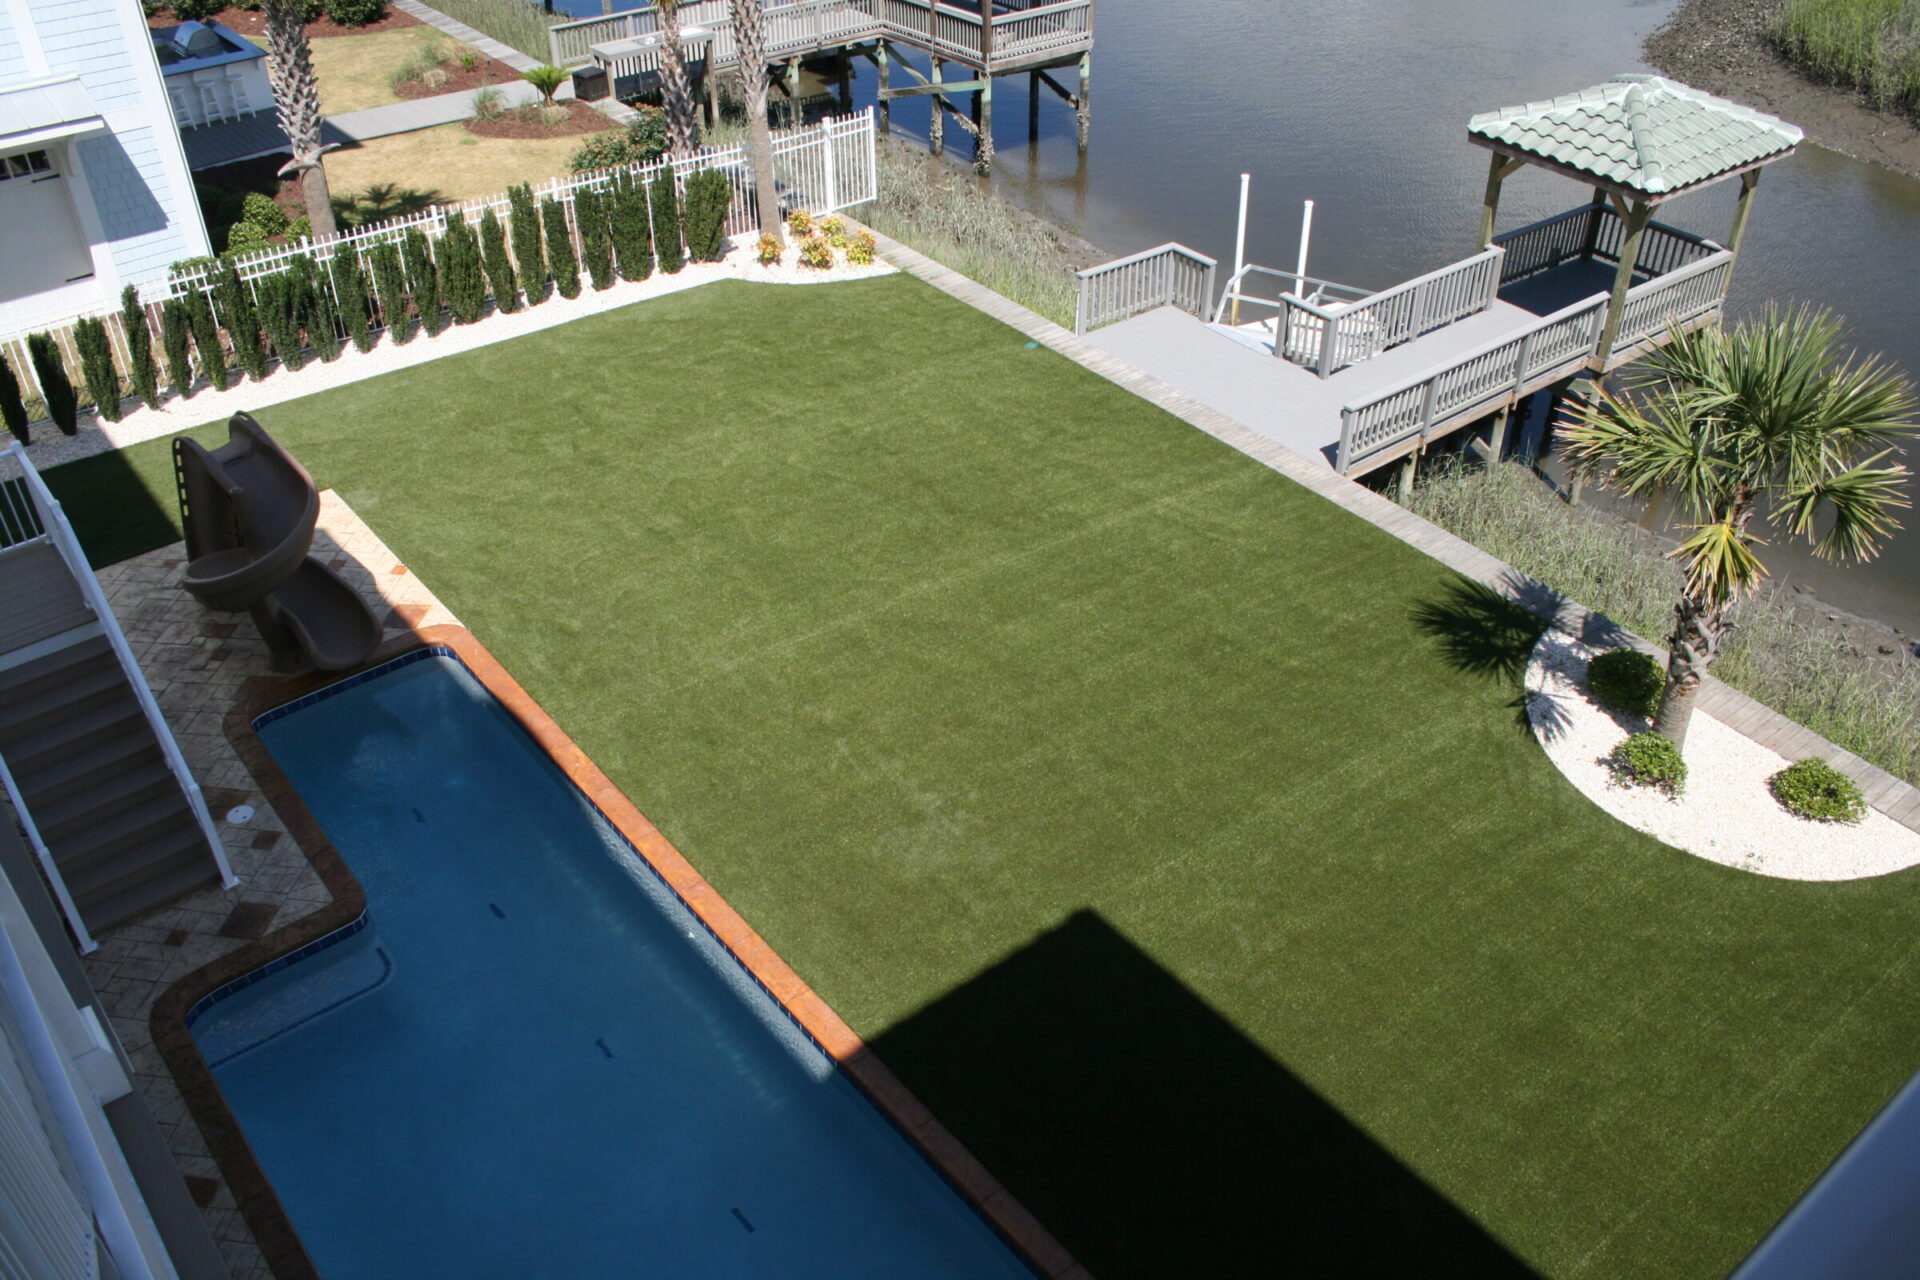 An aerial view of a backyard with a swimming pool, slide, artificial grass, a palm tree, a gazebo, dock over water, and a fence.